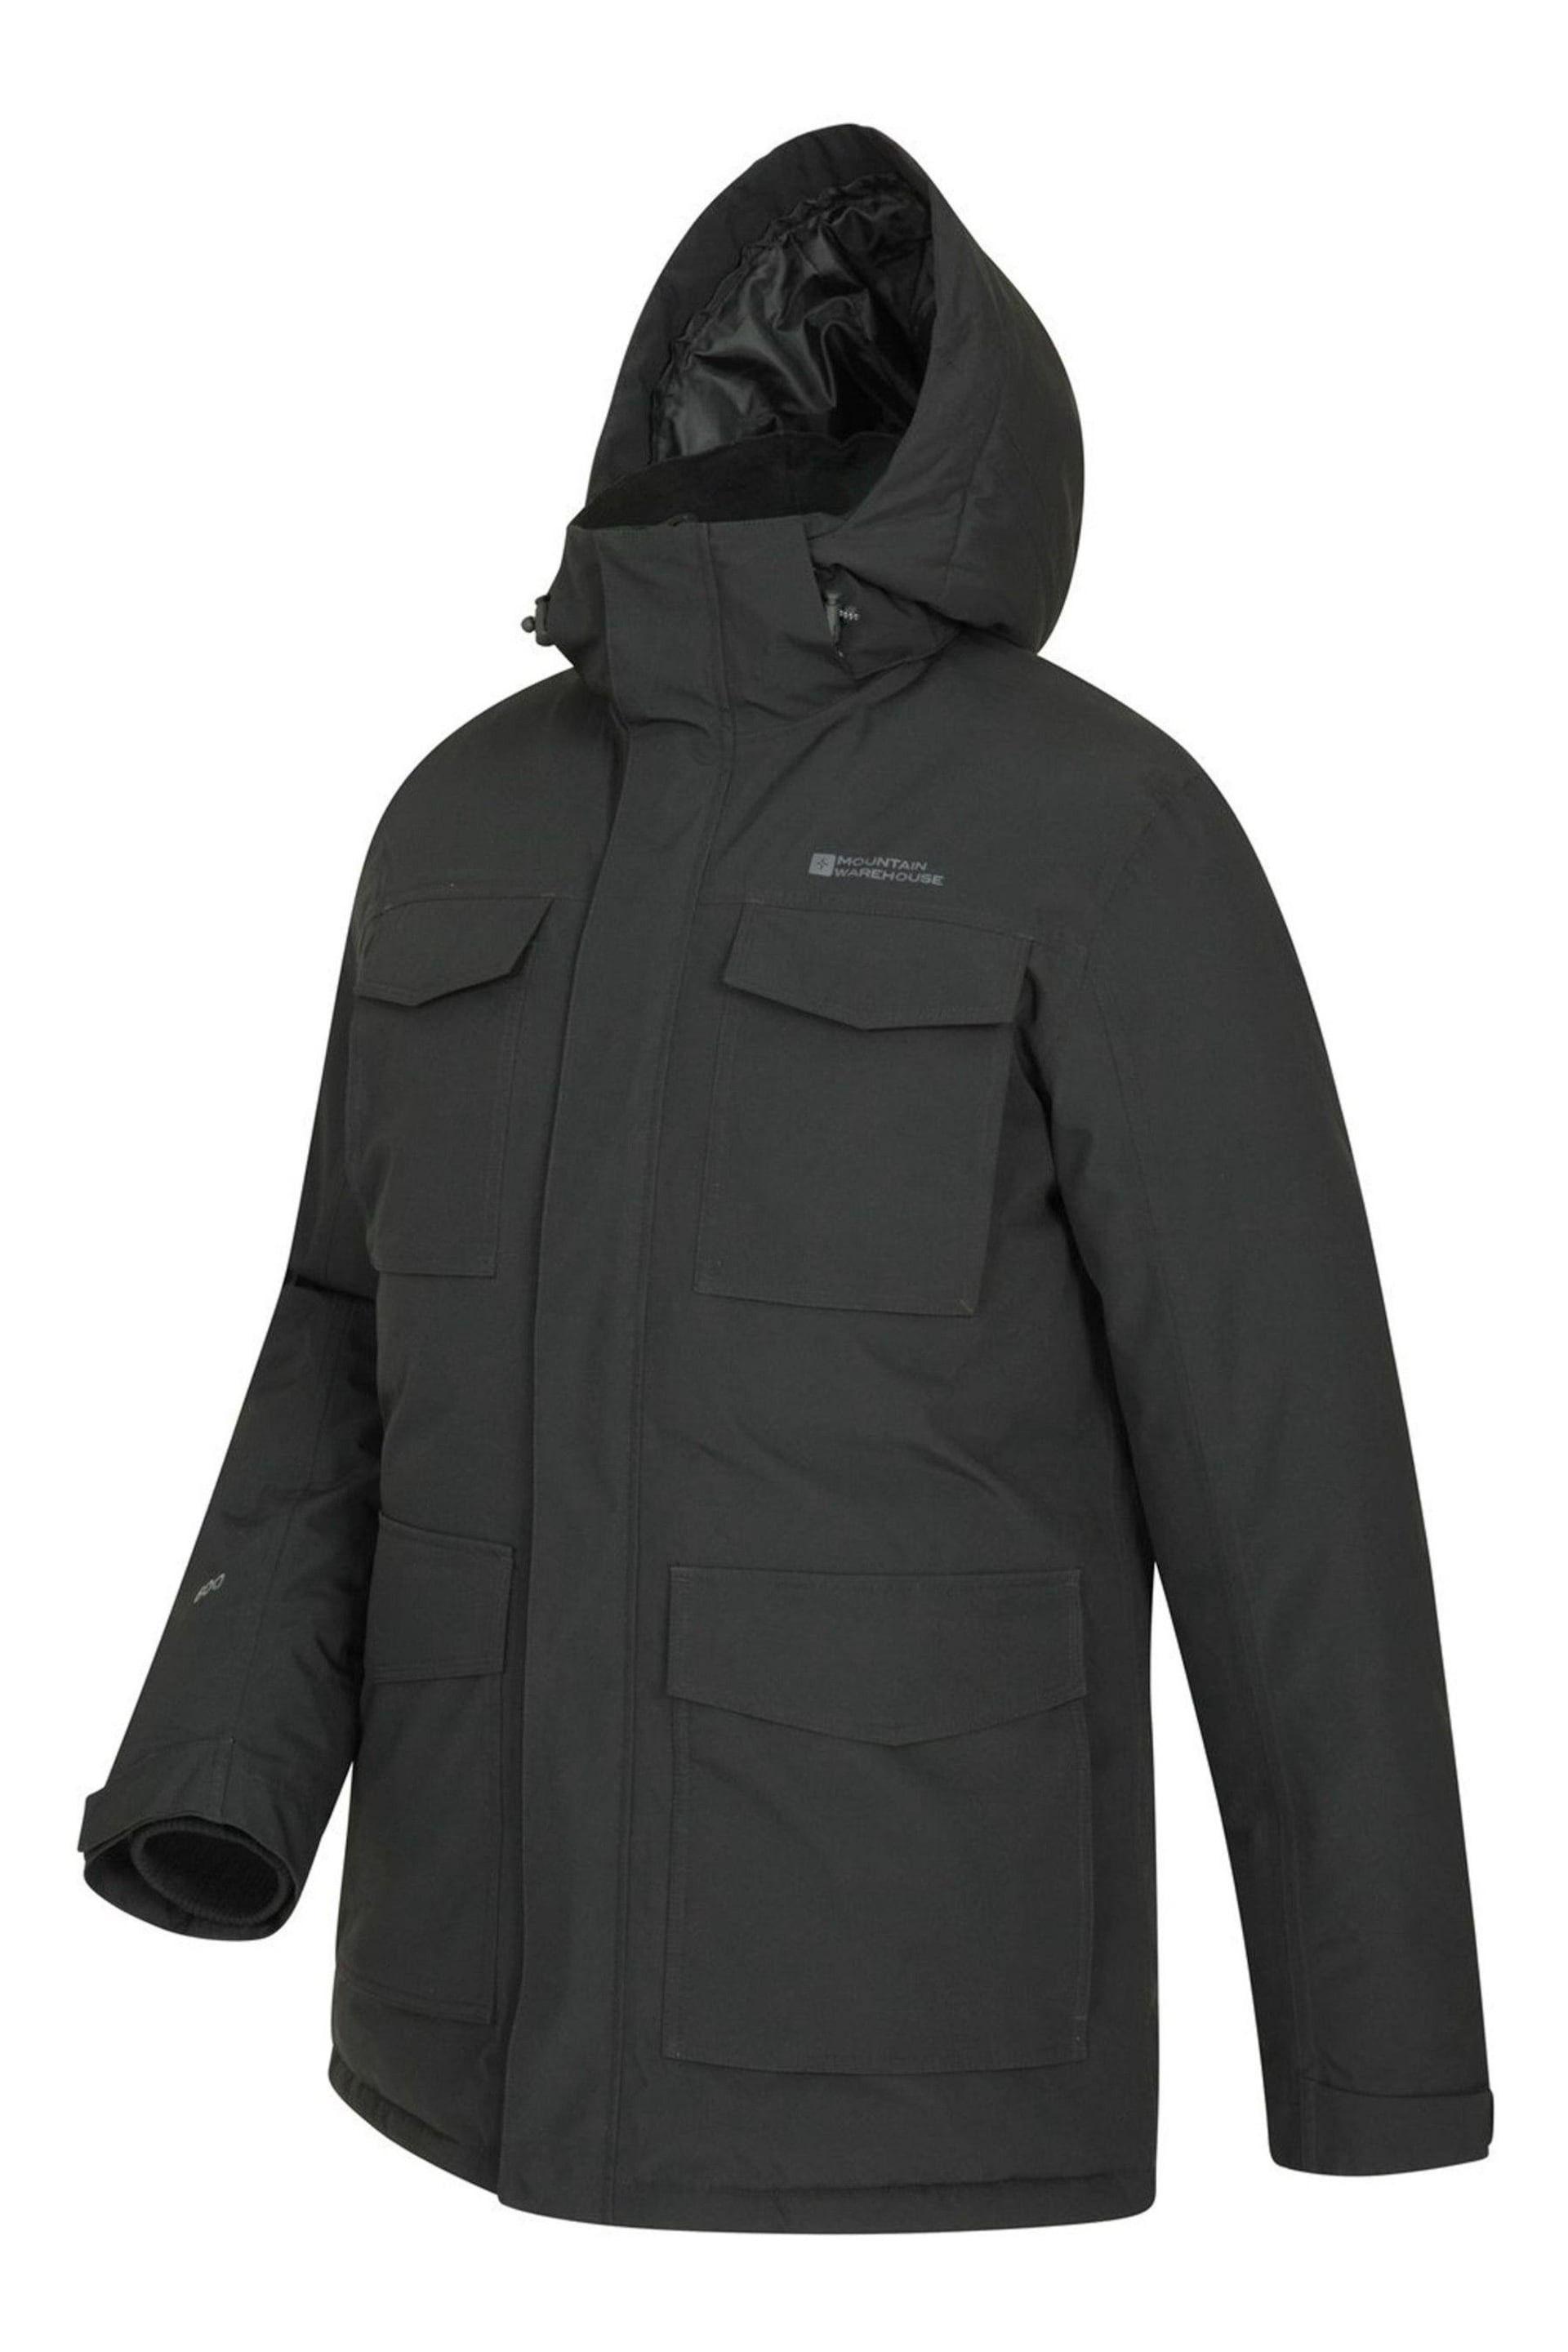 Mountain Warehouse Black Concord Waterproof Extreme Mens Down Long Jacket - Image 4 of 5